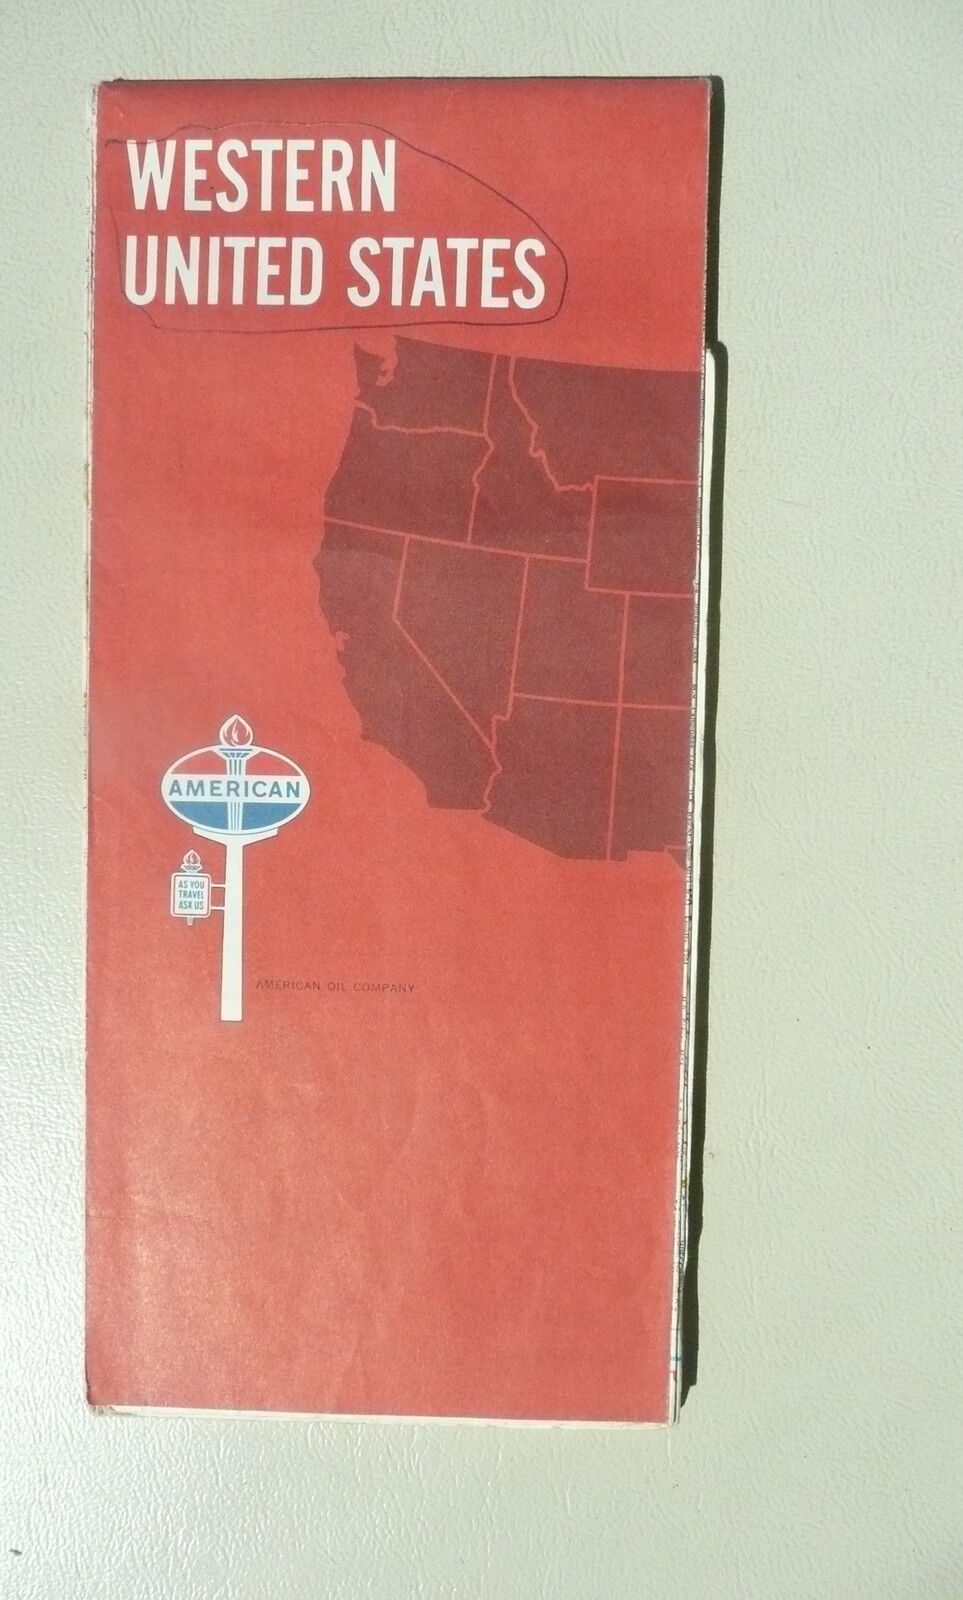 1968 Western United States  road  map American Oil gas